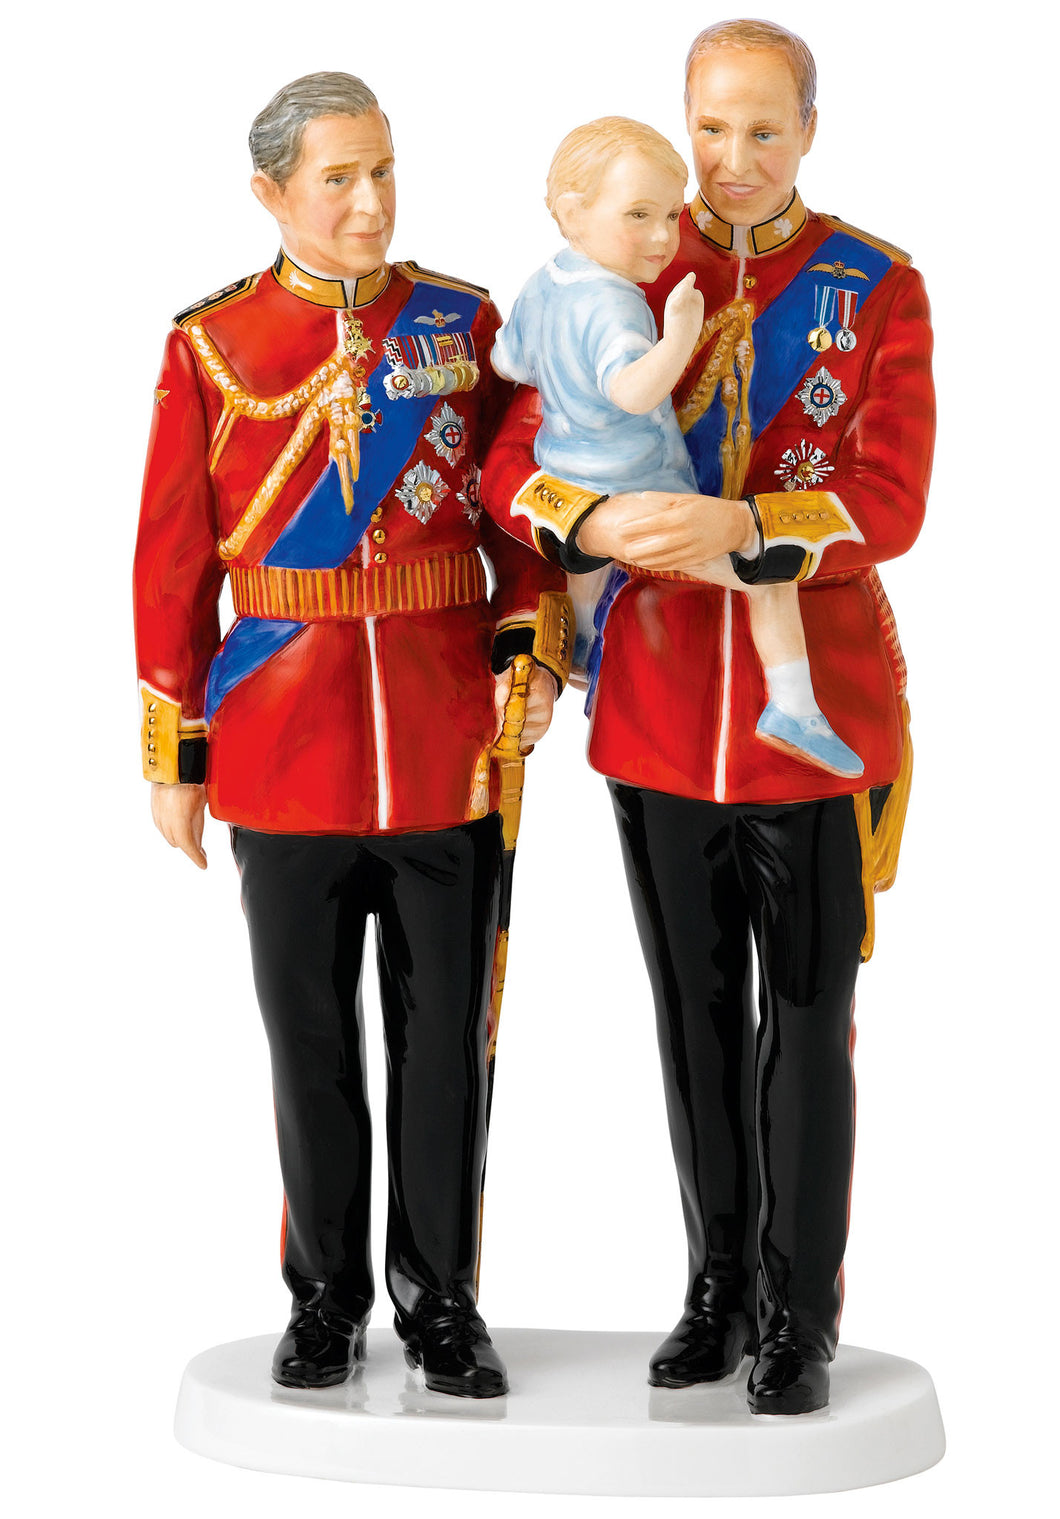 Royal Doulton 70th Wedding Anniversary Future Kings (22cm) AVAILABLE - LAST FEW AVAILABLE!